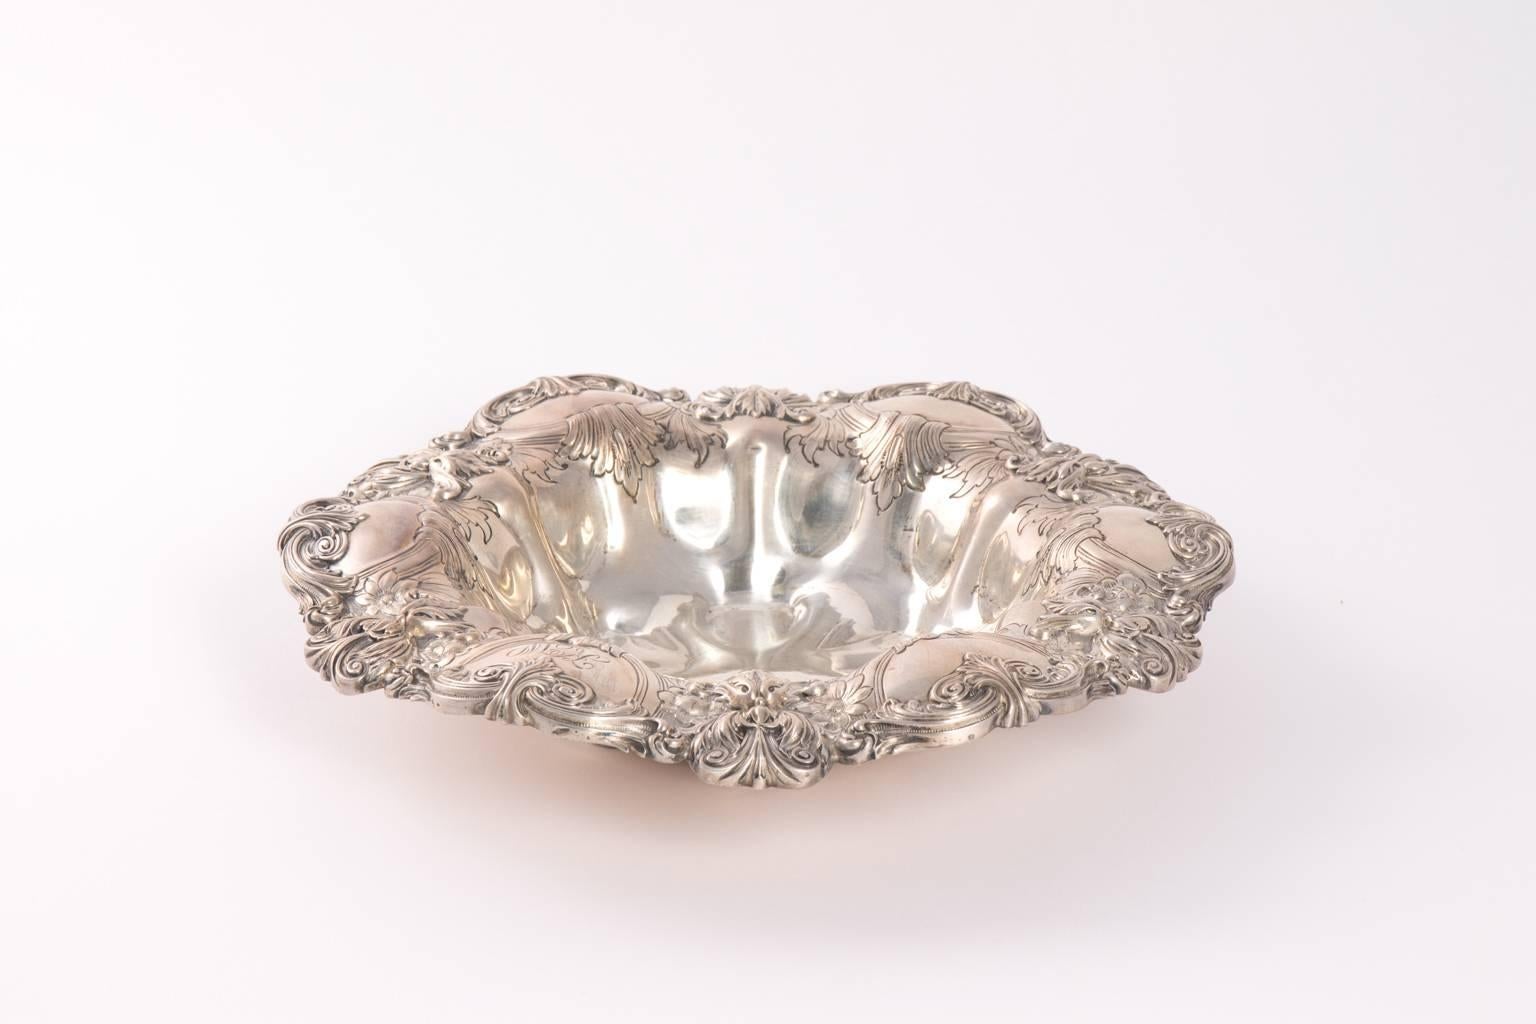 Dated 1907 sterling silver repoussé Gorham bowl, embellished with intricate floral pattern.
Period: 1890-1920
Styles: Victorian.
 